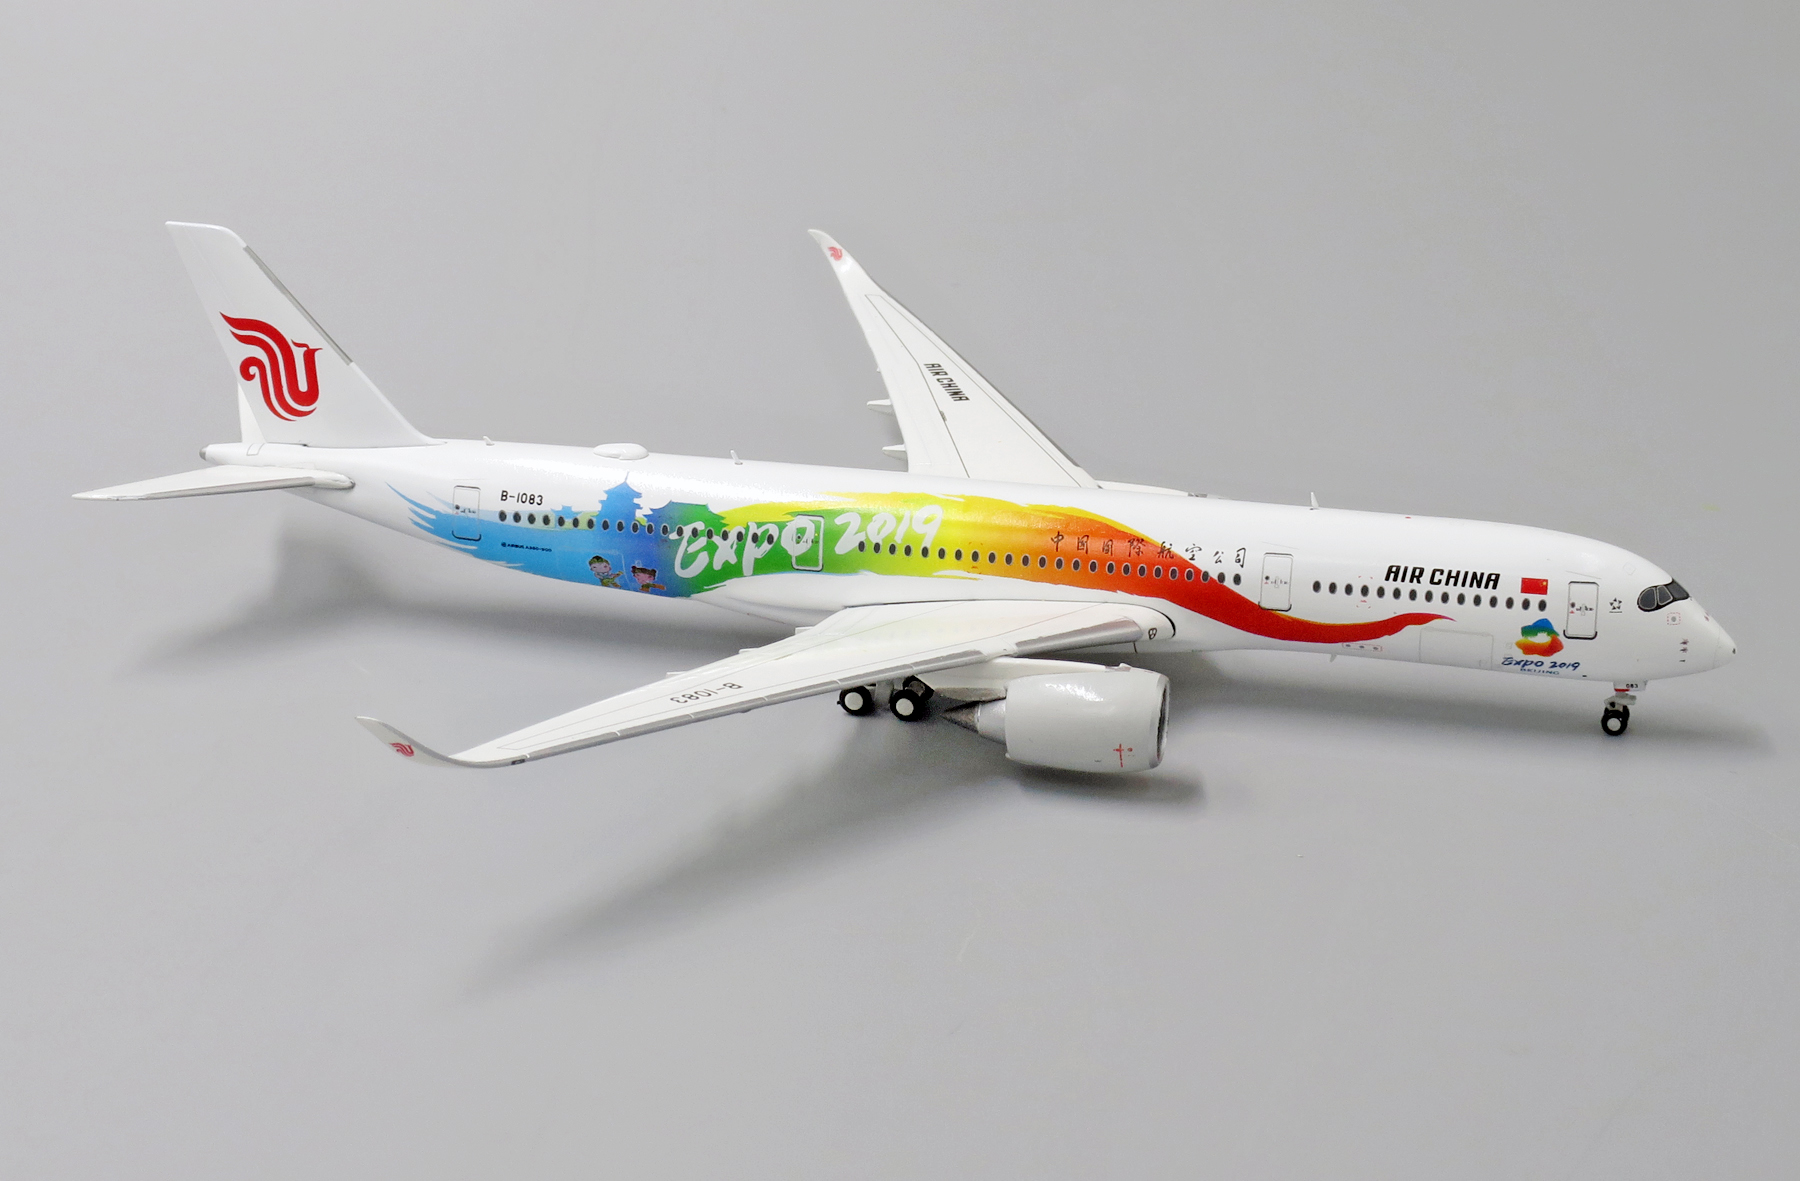 XX2084 Details about   JC Wings 1:200 Air China Airbus A350-900 B-1083 'Expo 2019' Model Plane 